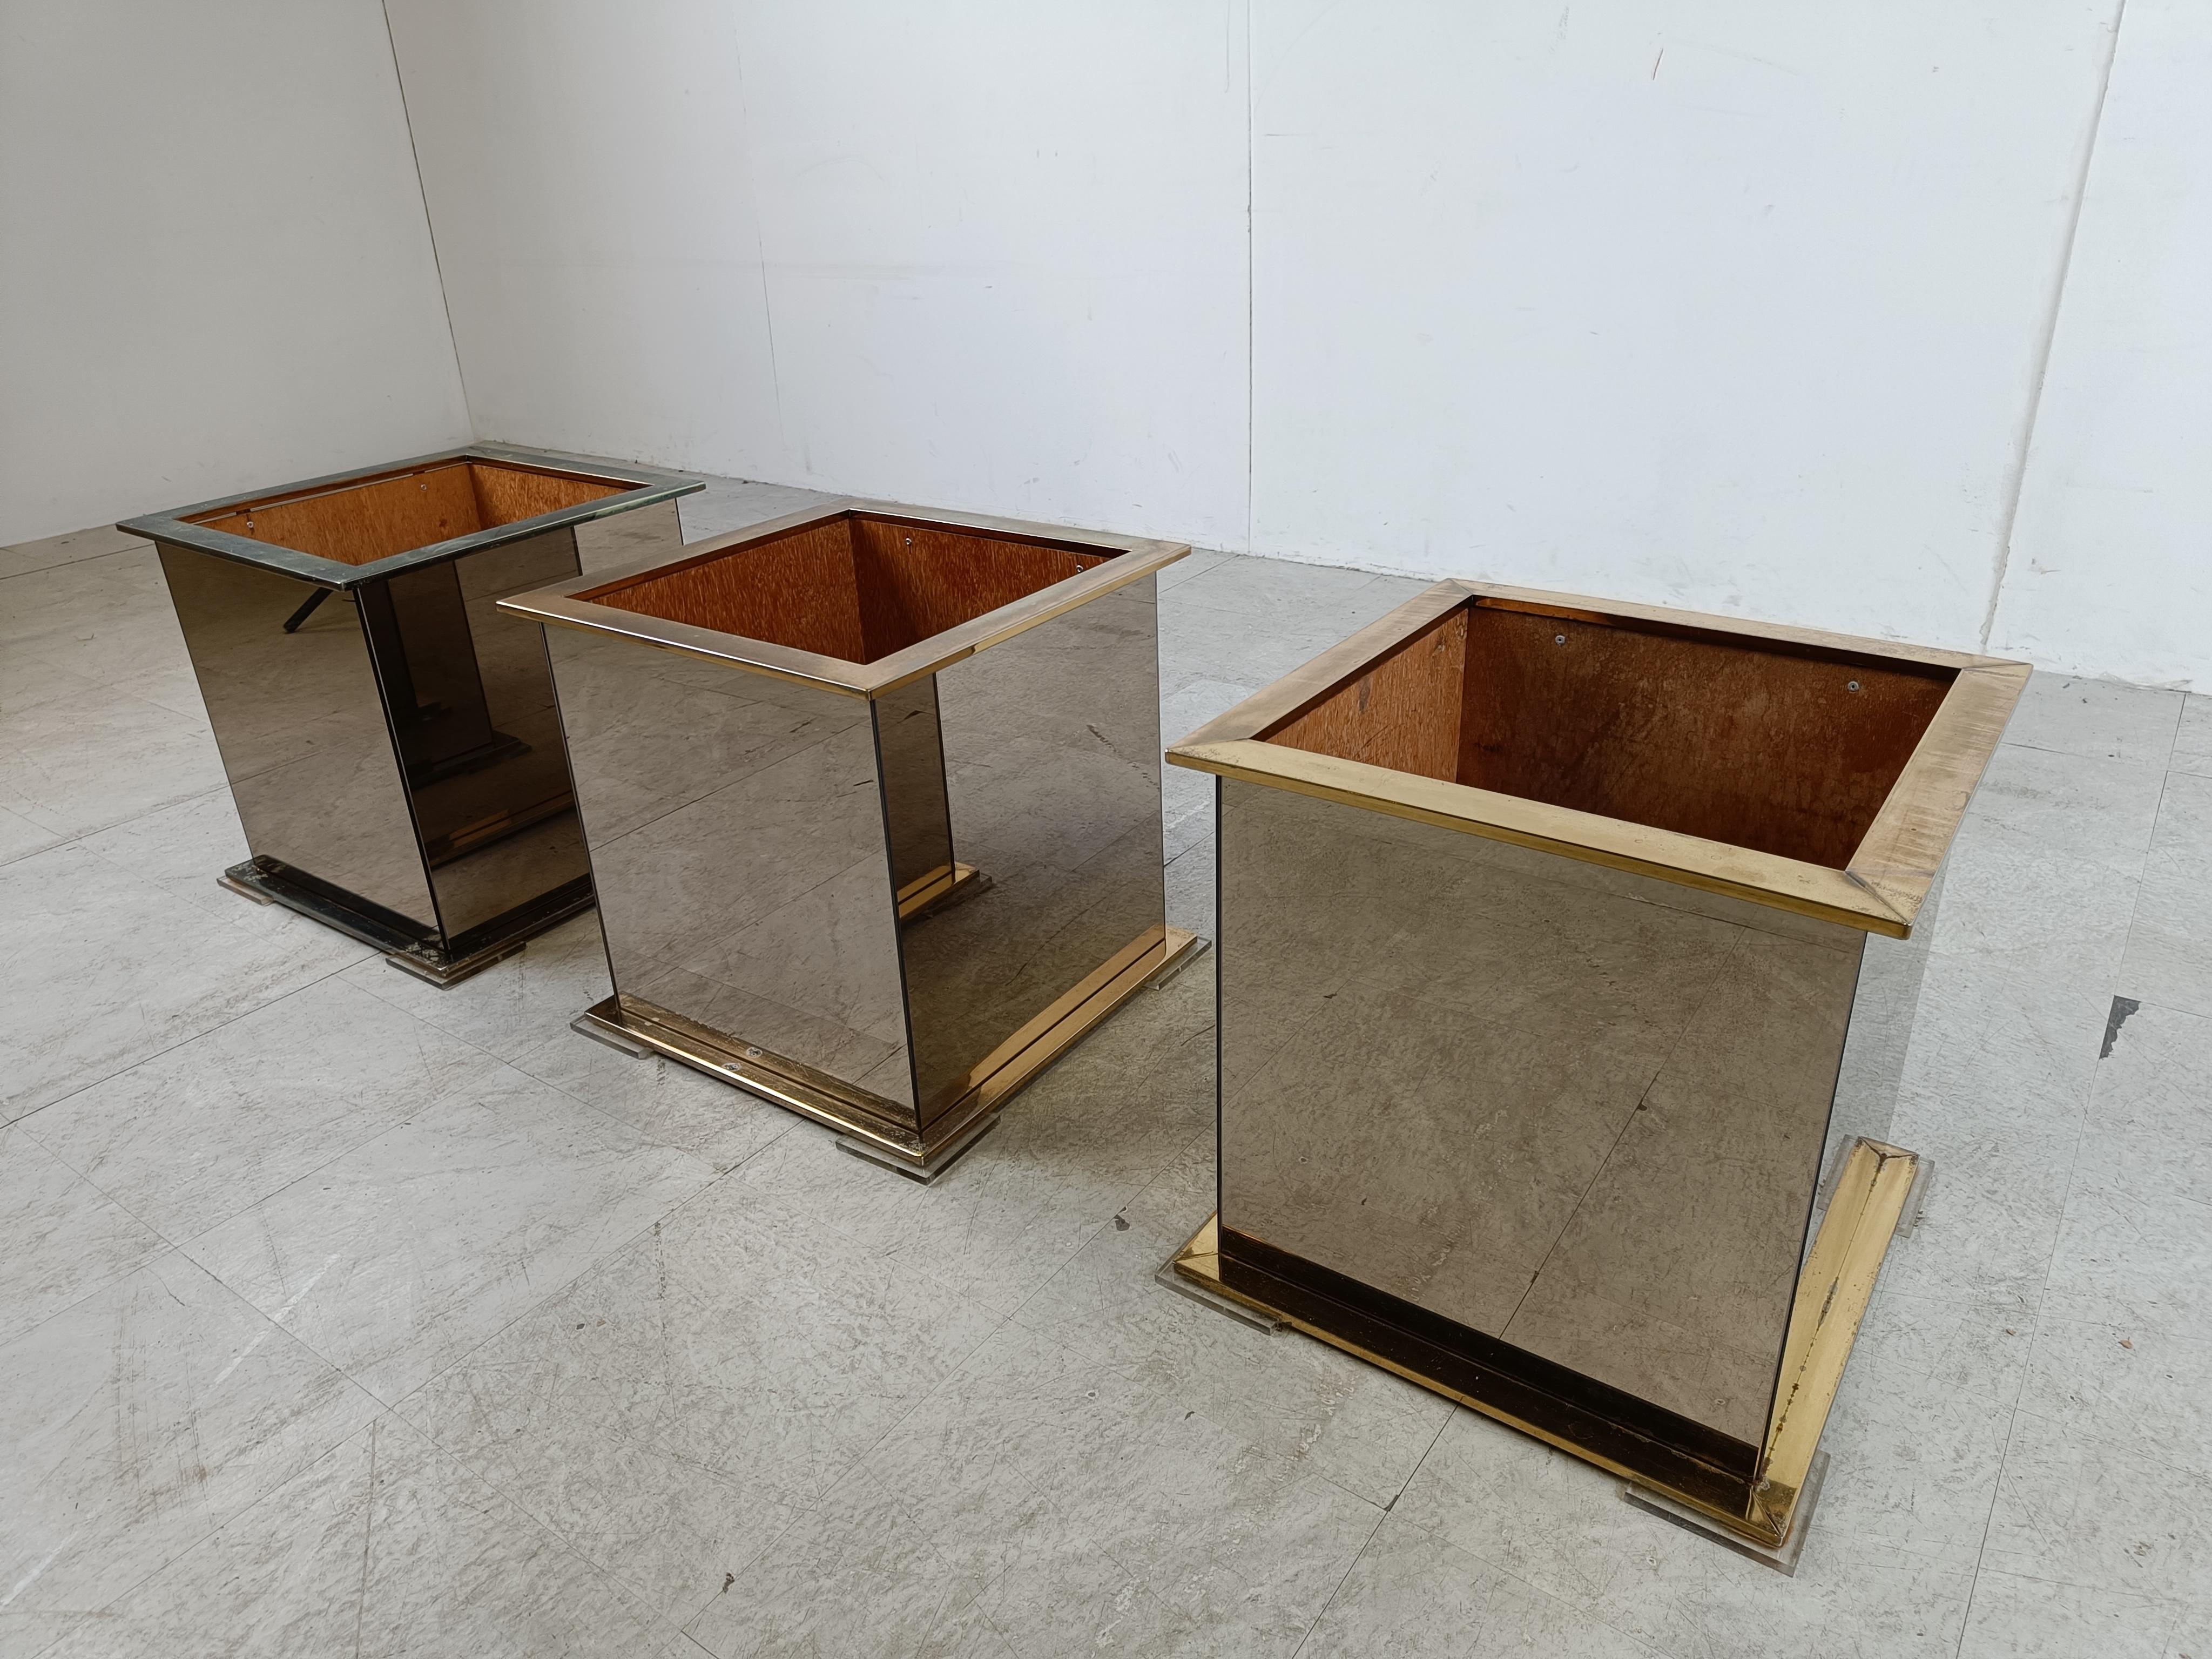 Set of three brass and mirrored glass planters.

They can be placed together or used separately to make a nice setup.

Very good condition.

1970s - Belgium

Dimensions:
Height: 44cm/17.32